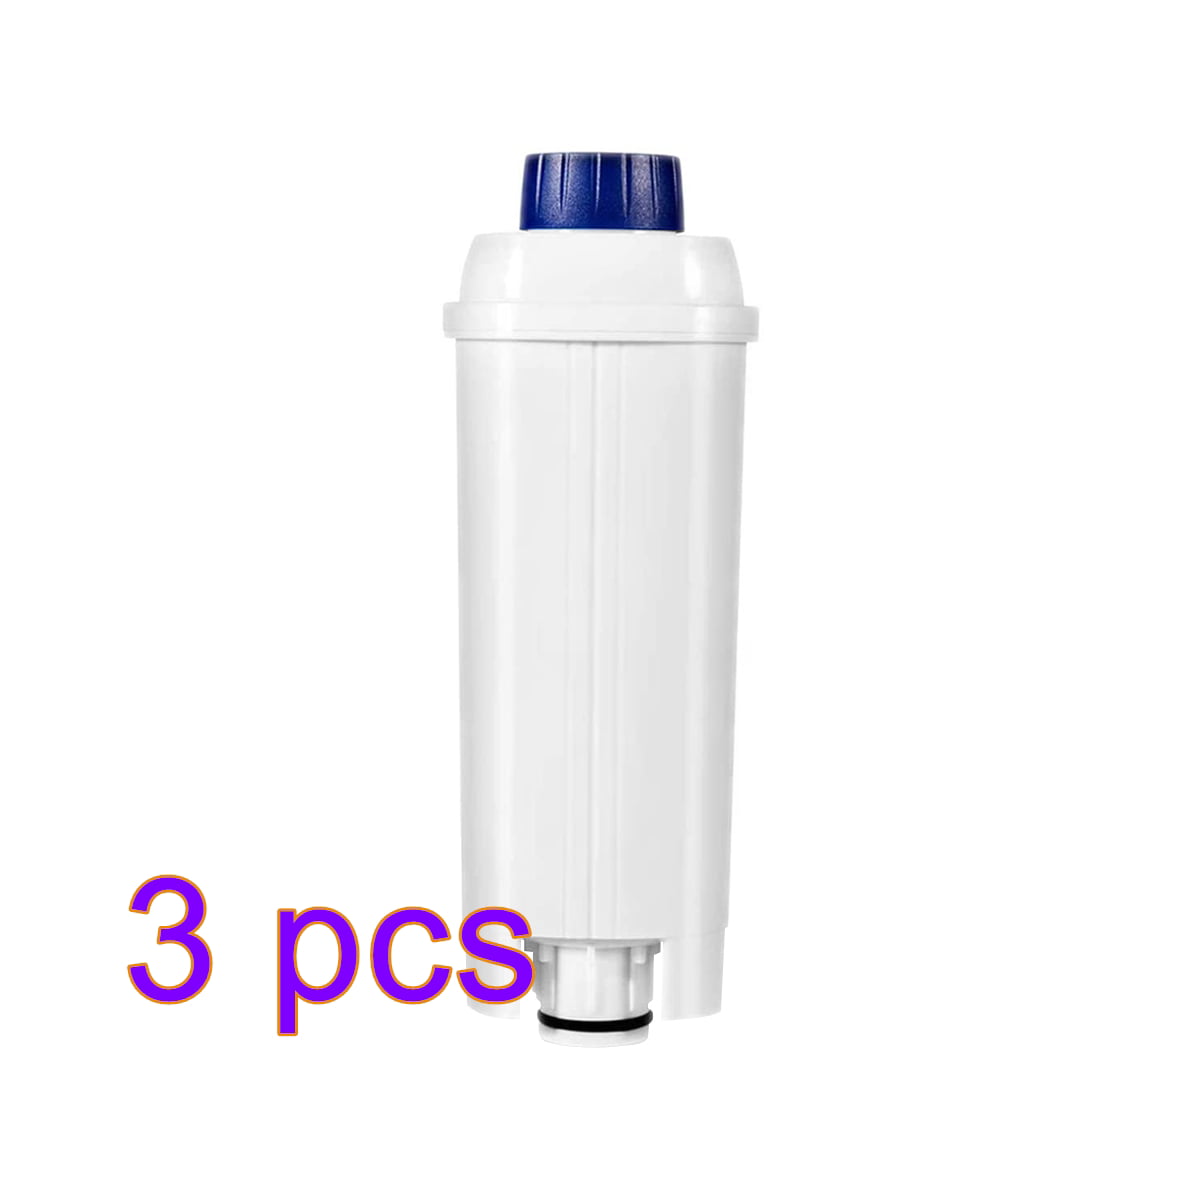 6x Compatilble water filter softener DLS C002 SER3017 for DeLonghi Bean to Cup 